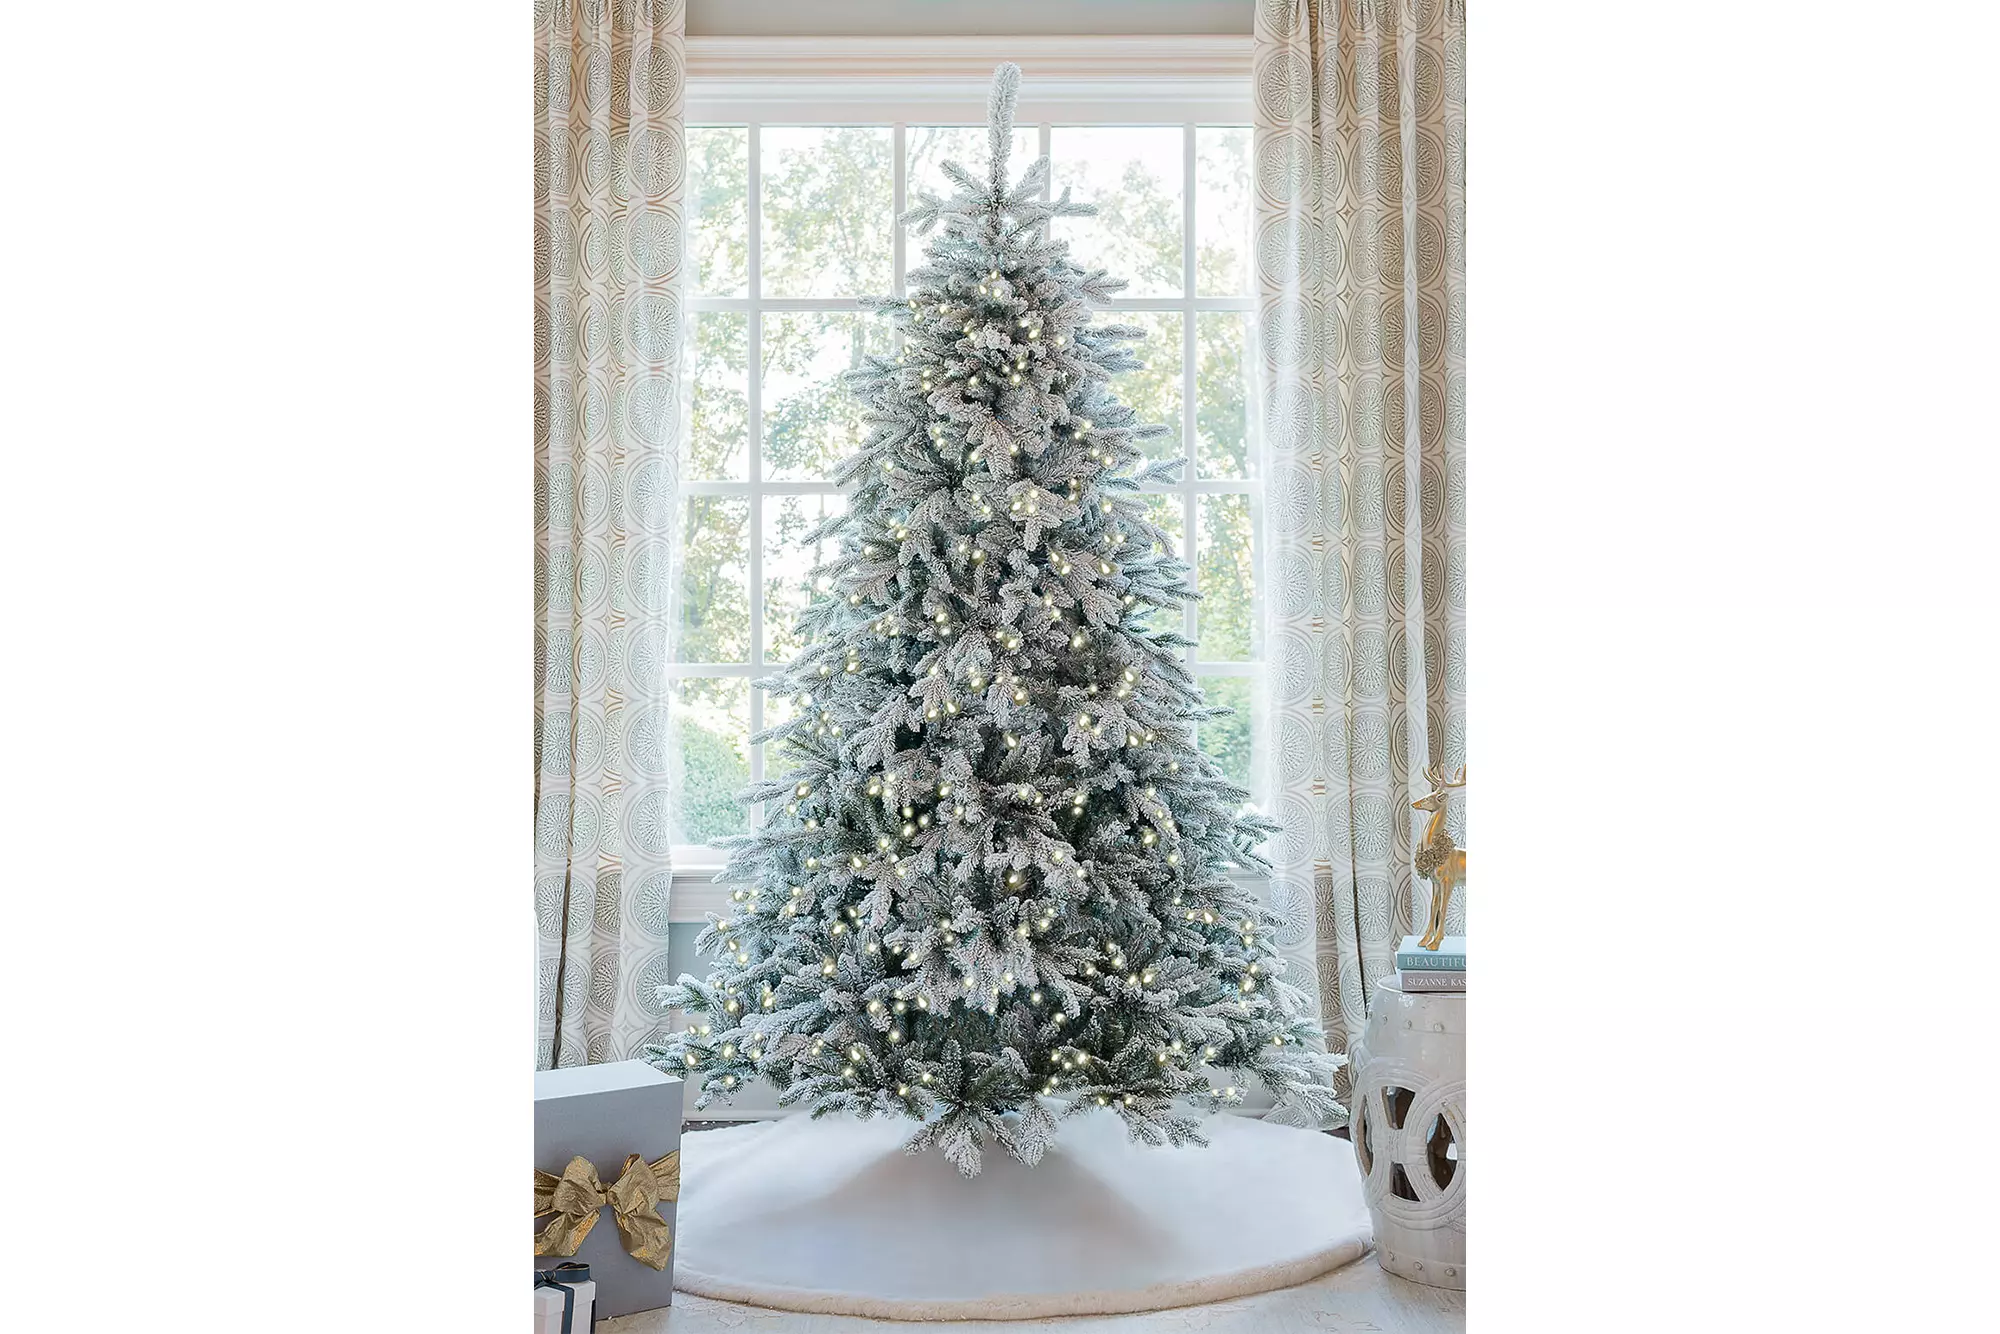 King of Christmas Queen Flock Artificial Christmas Tree with 900 Warm White LED Lights